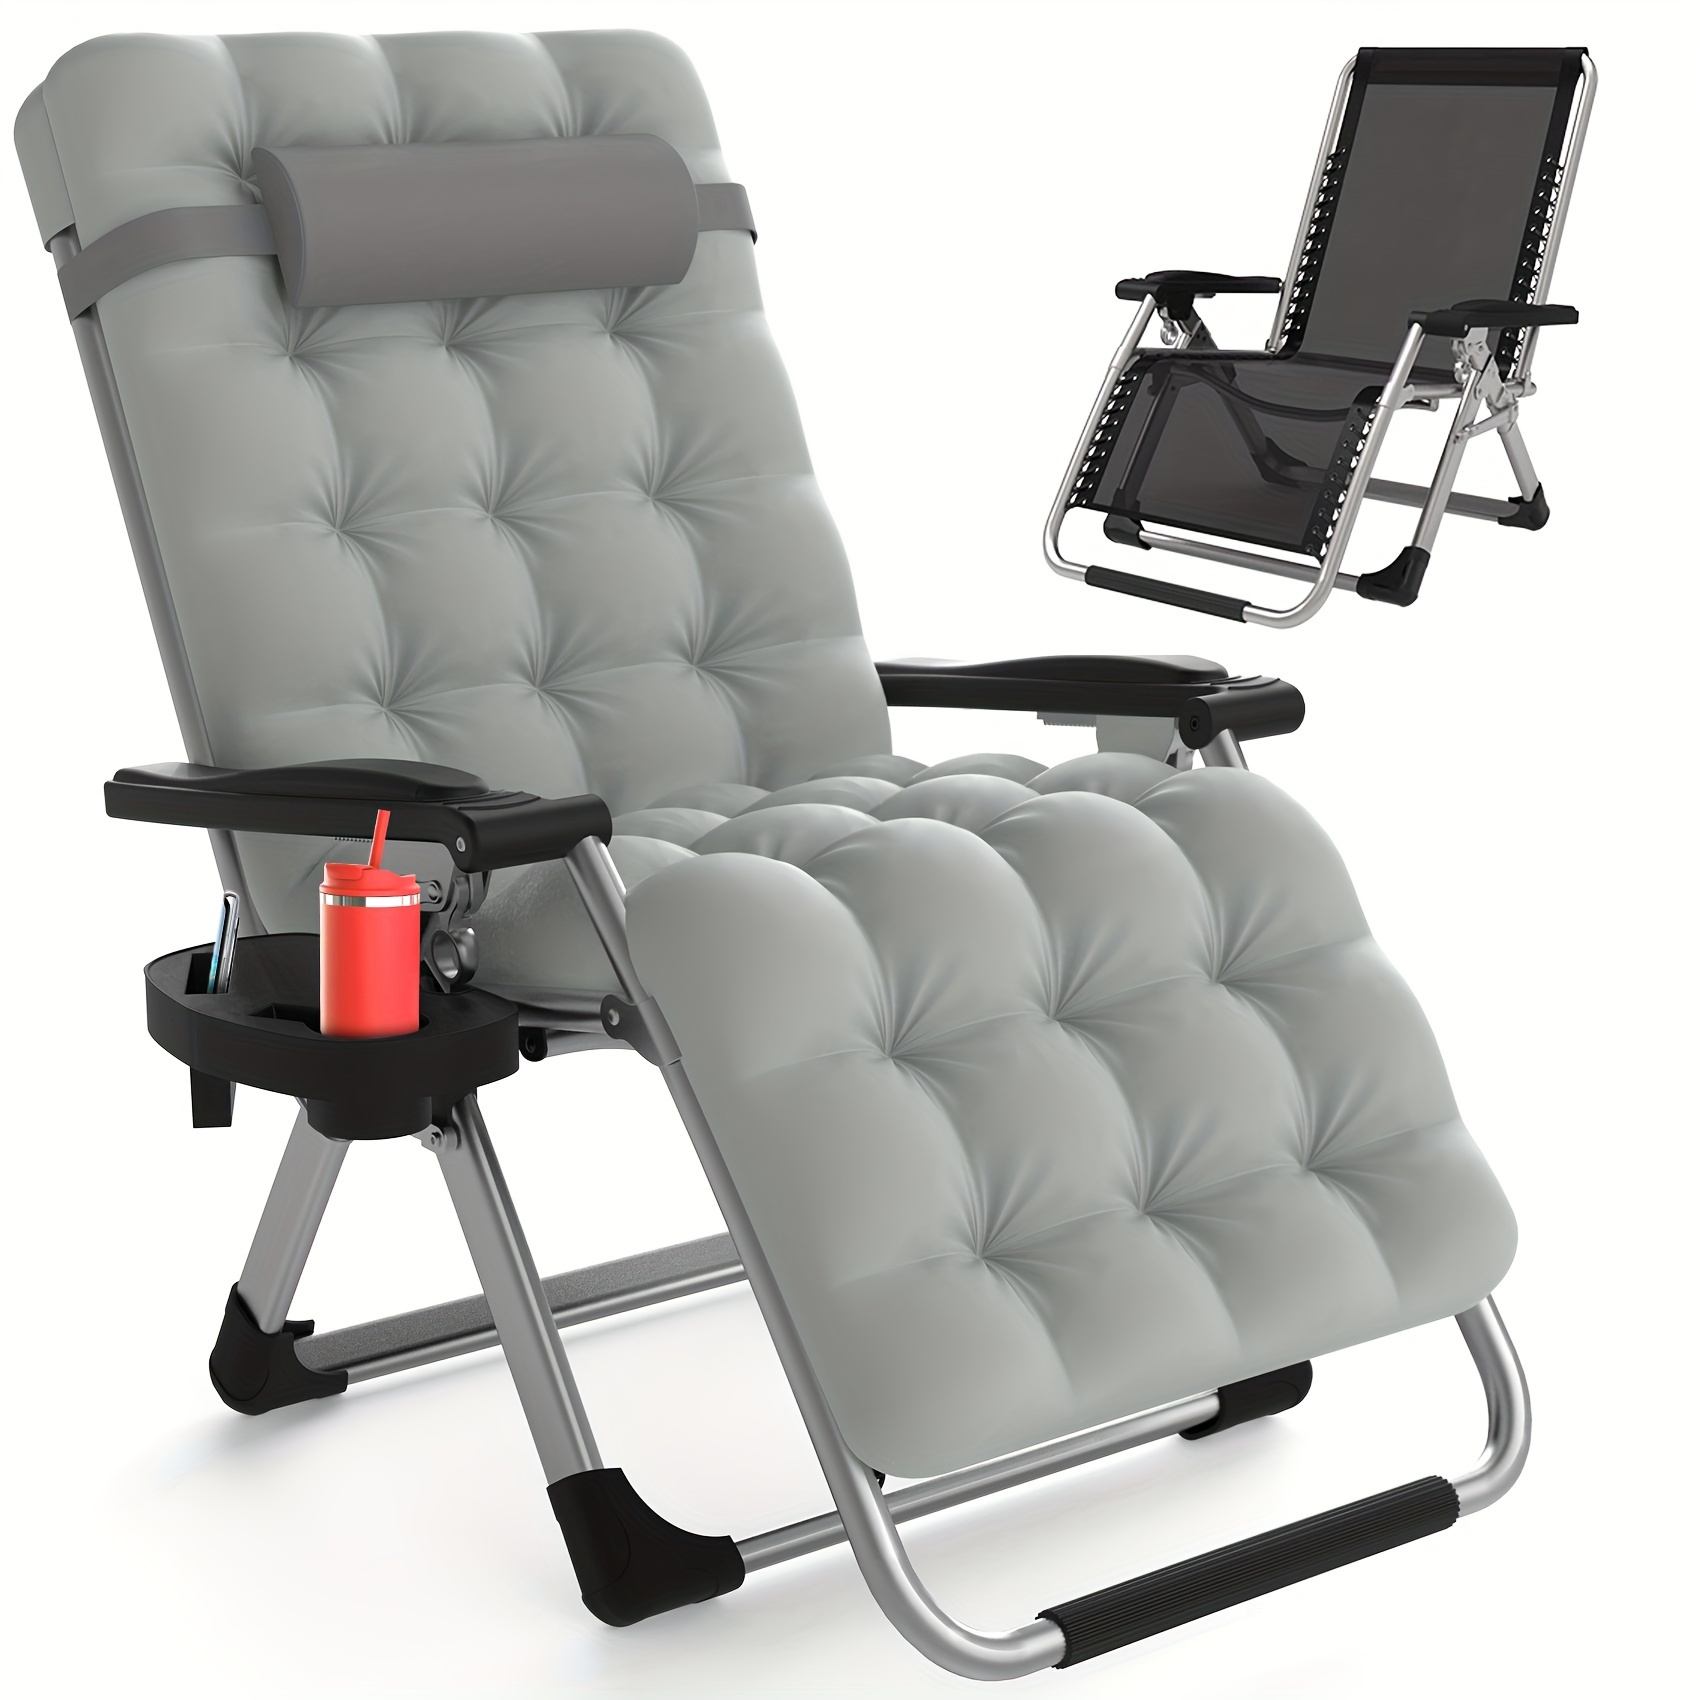 * Lounge Chair Recliner w/Upgraded Lock and Removable Cushion, Reclining  Camping Chair w/Cup Holder Tray & Headrest, Folding Reclinin